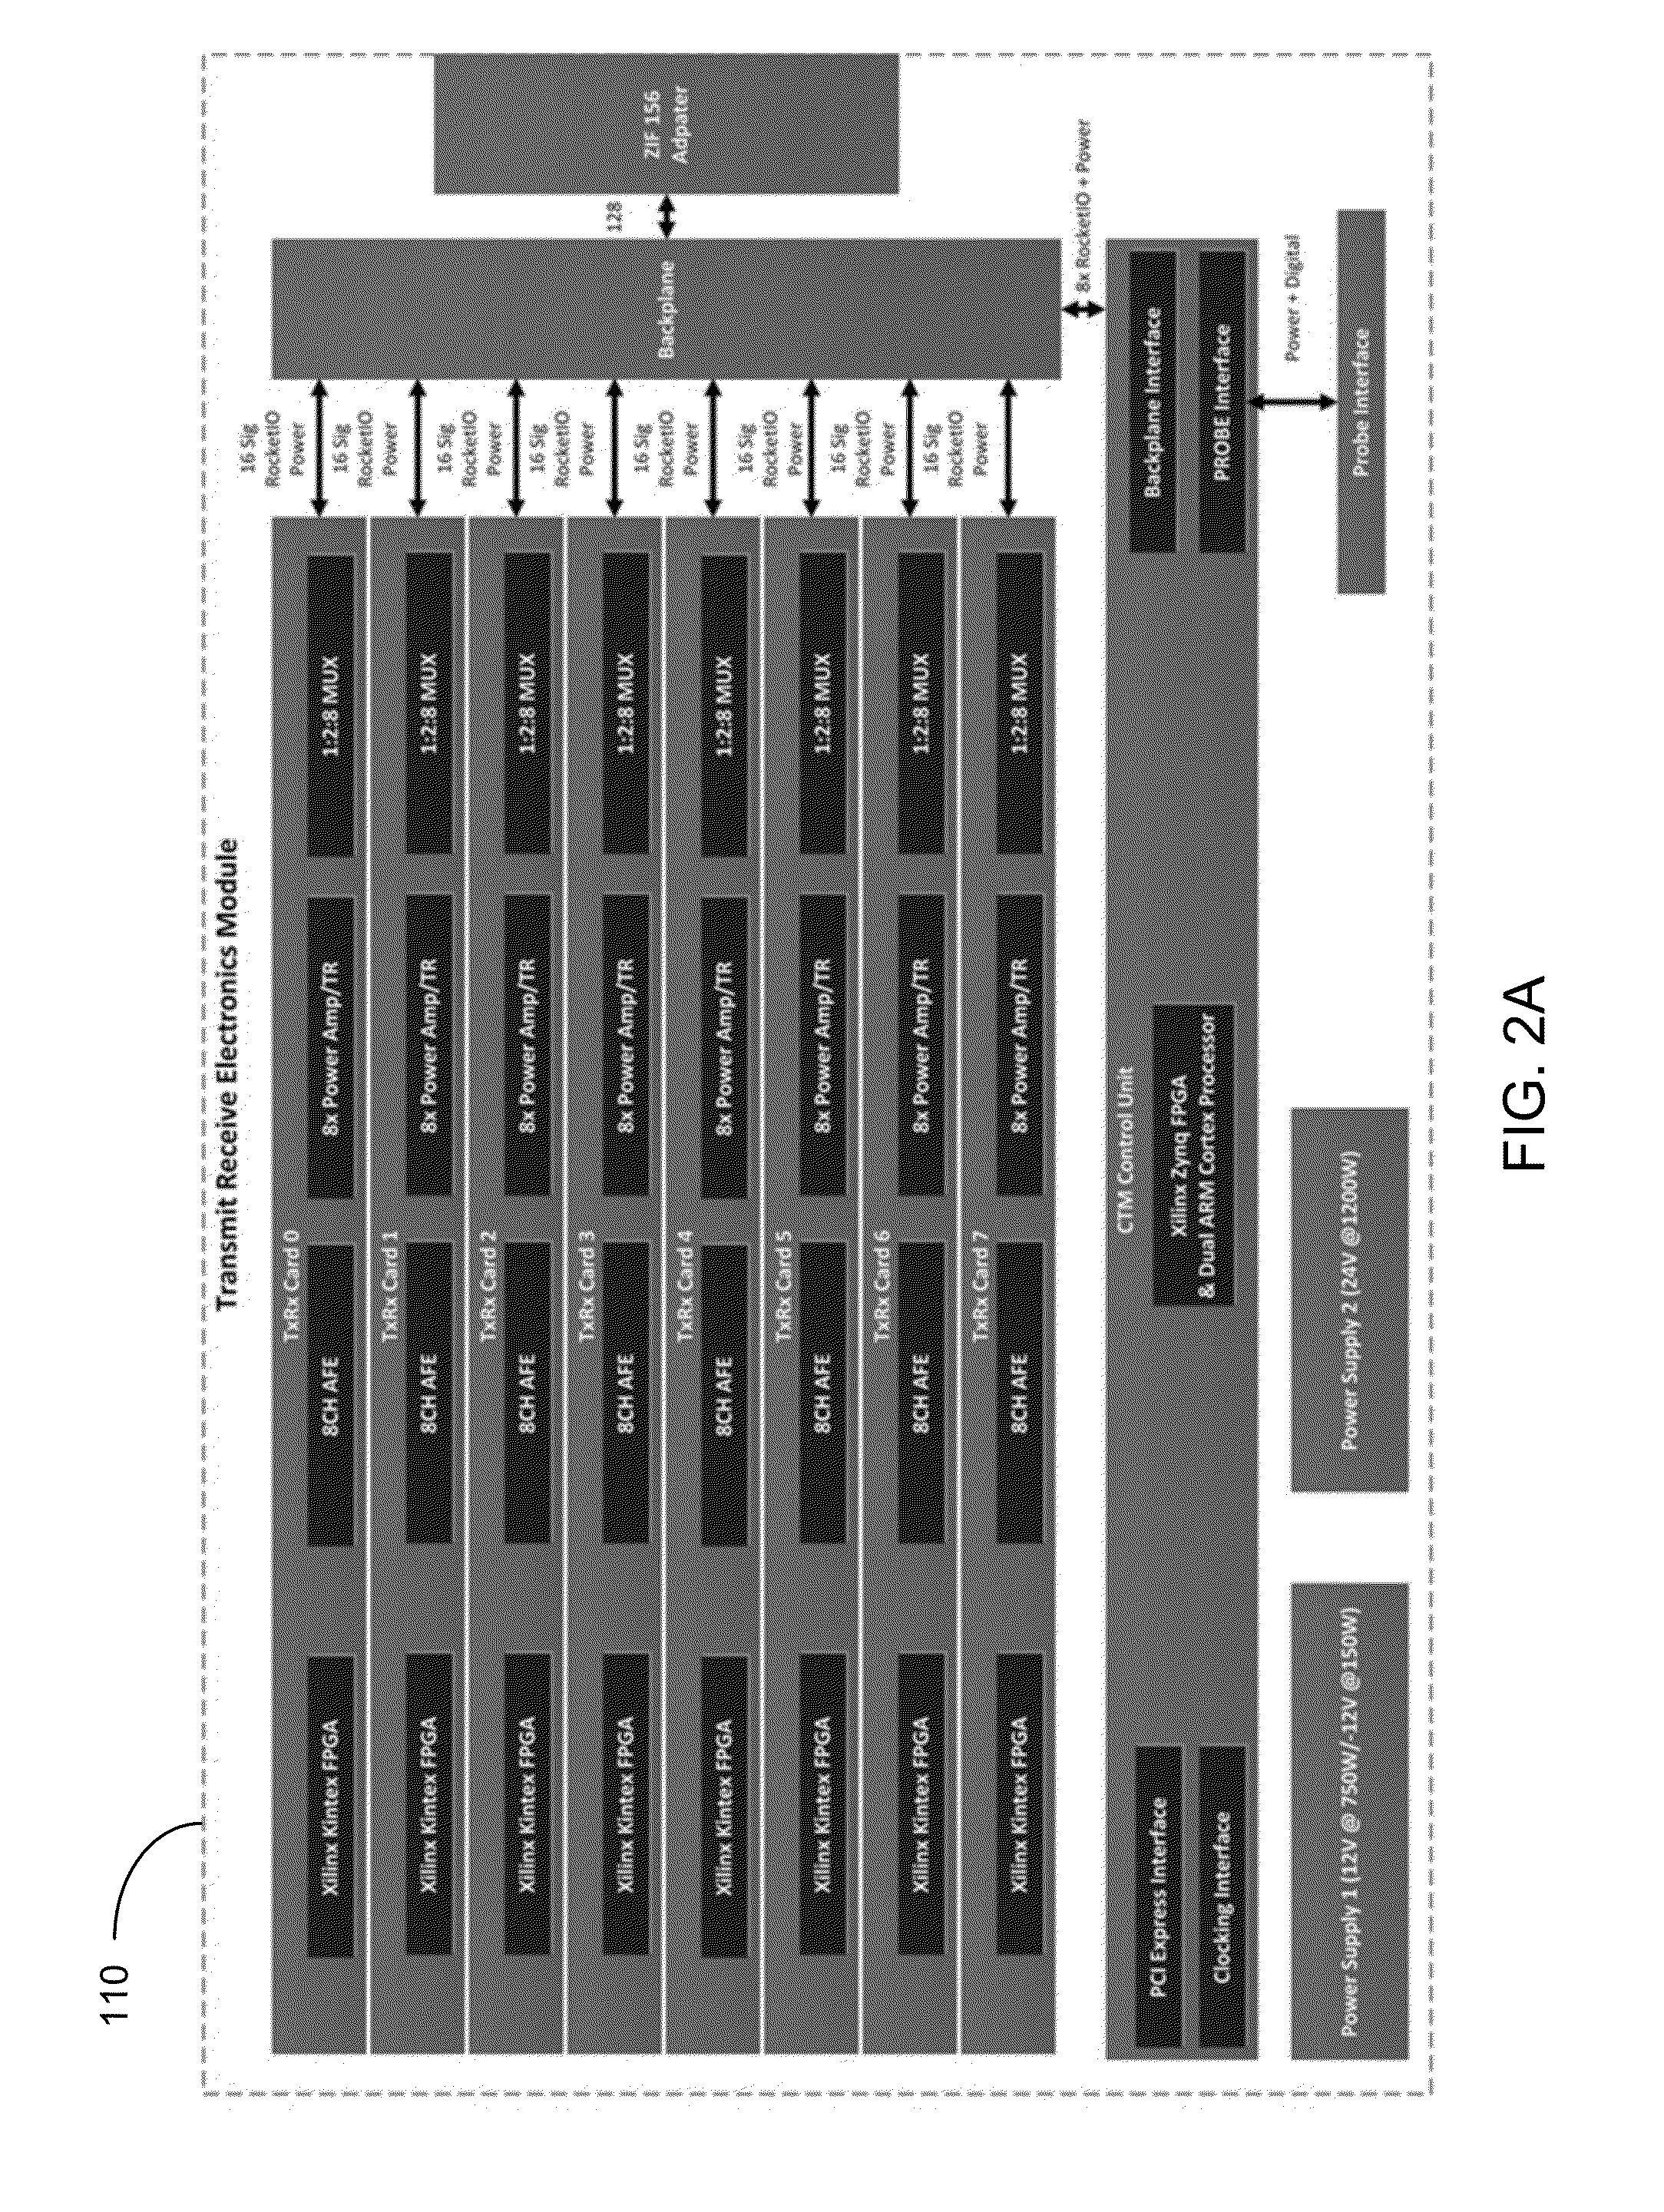 Synthetic aperture ultrasound system